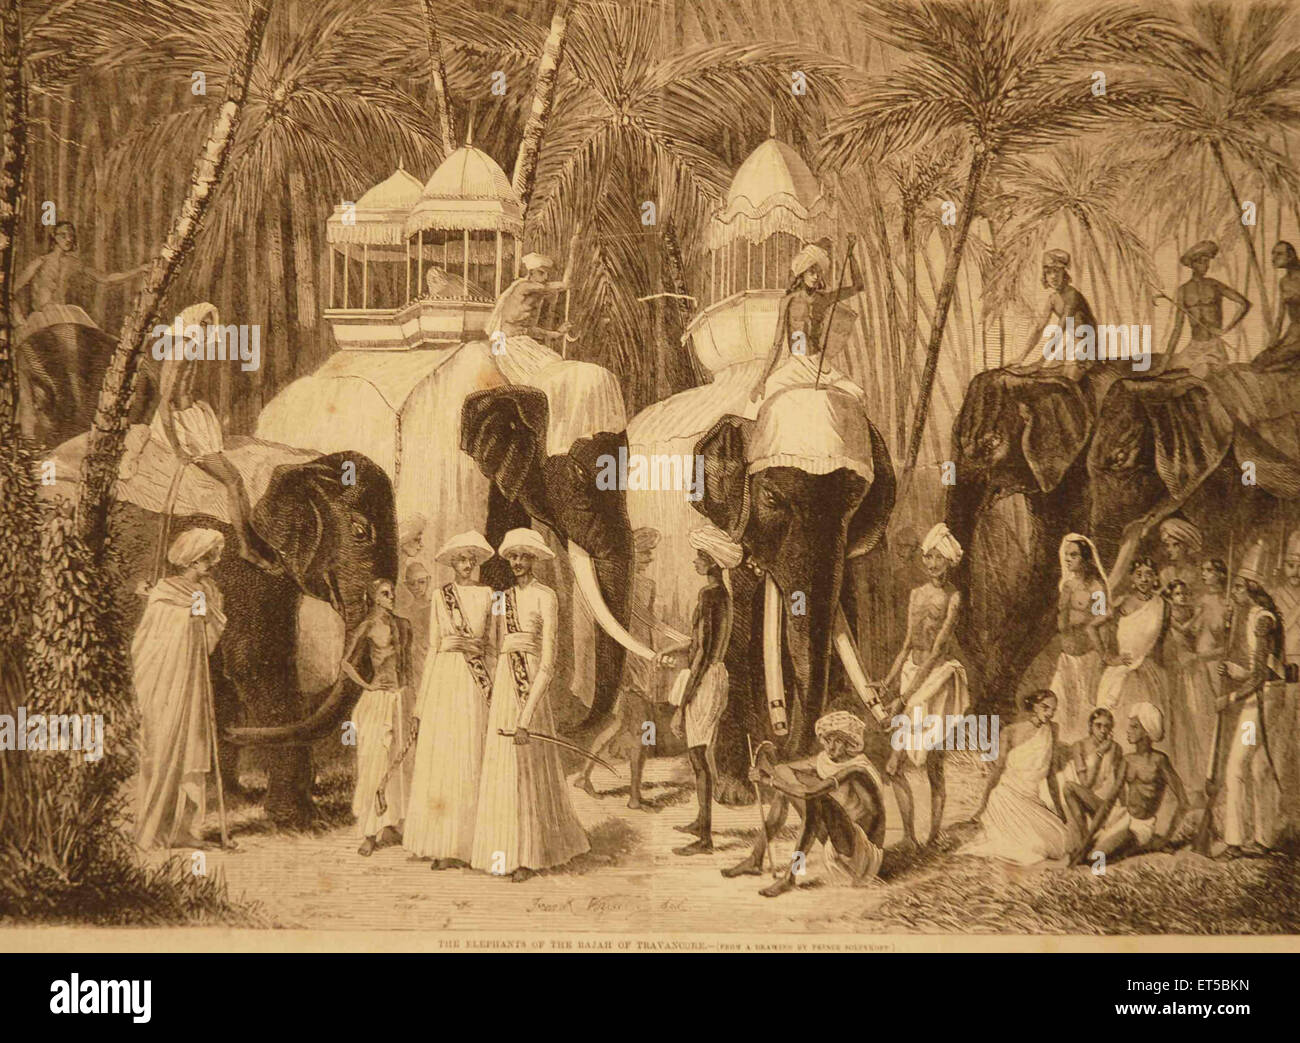 Lithographs The Elephants of the Rajah of Travanoore ; India Stock Photo